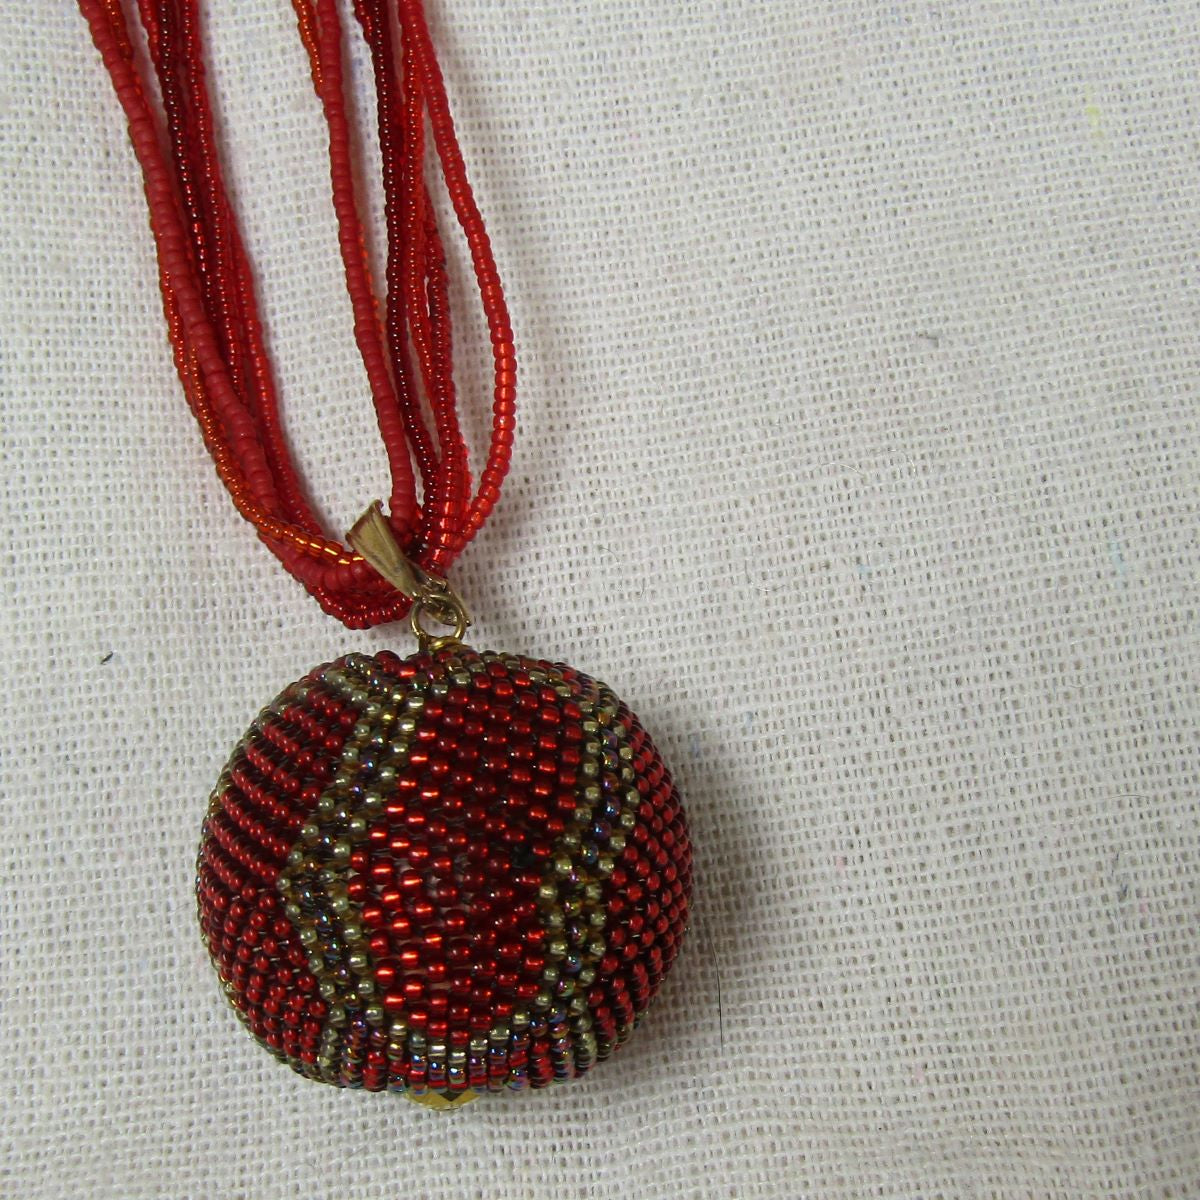 Fiesta Red Twisted Seed Bead Necklace with Pendant - VP's Jewelry